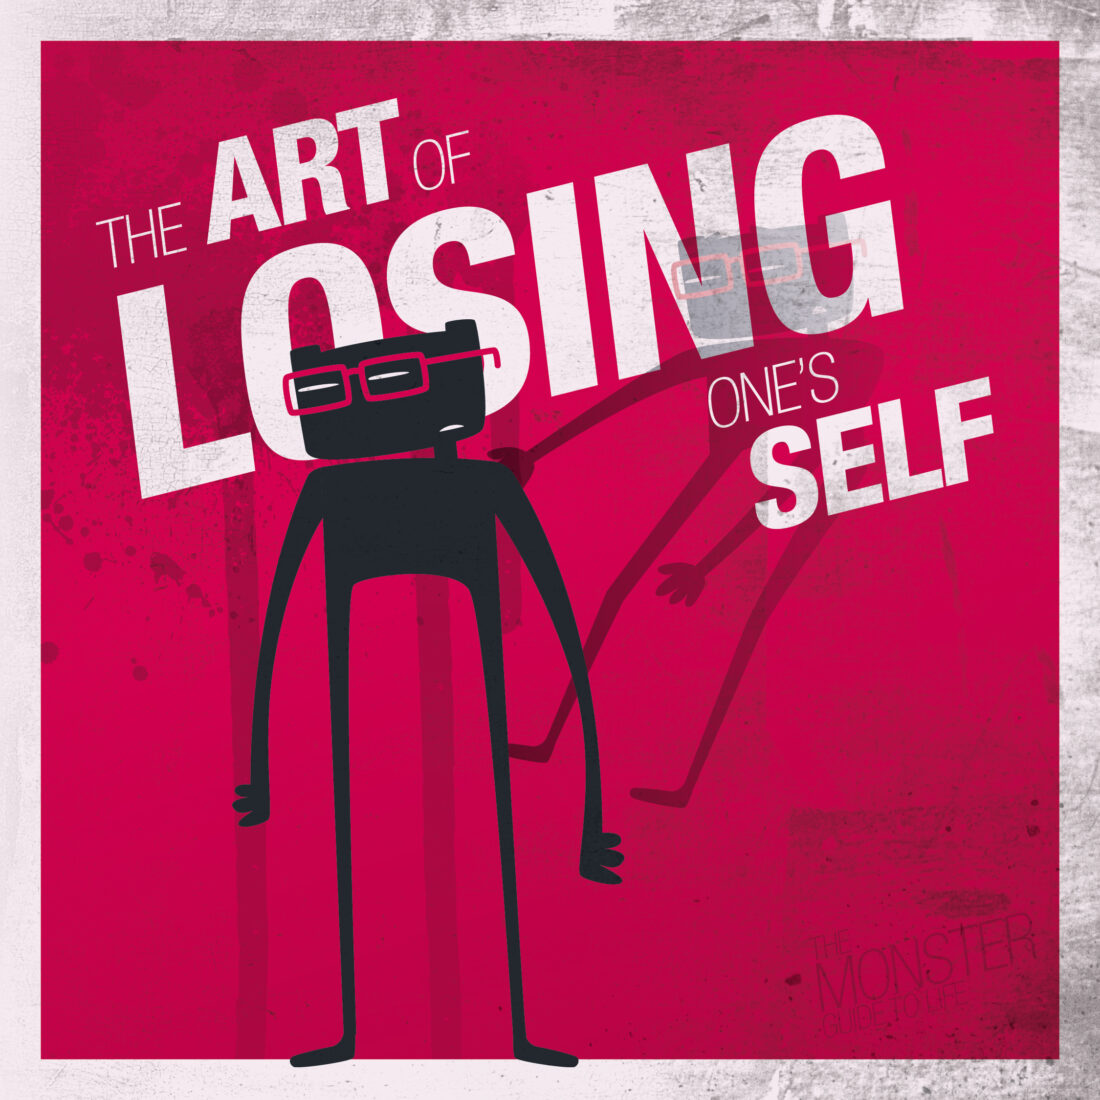 The Art Of Losing One's Self